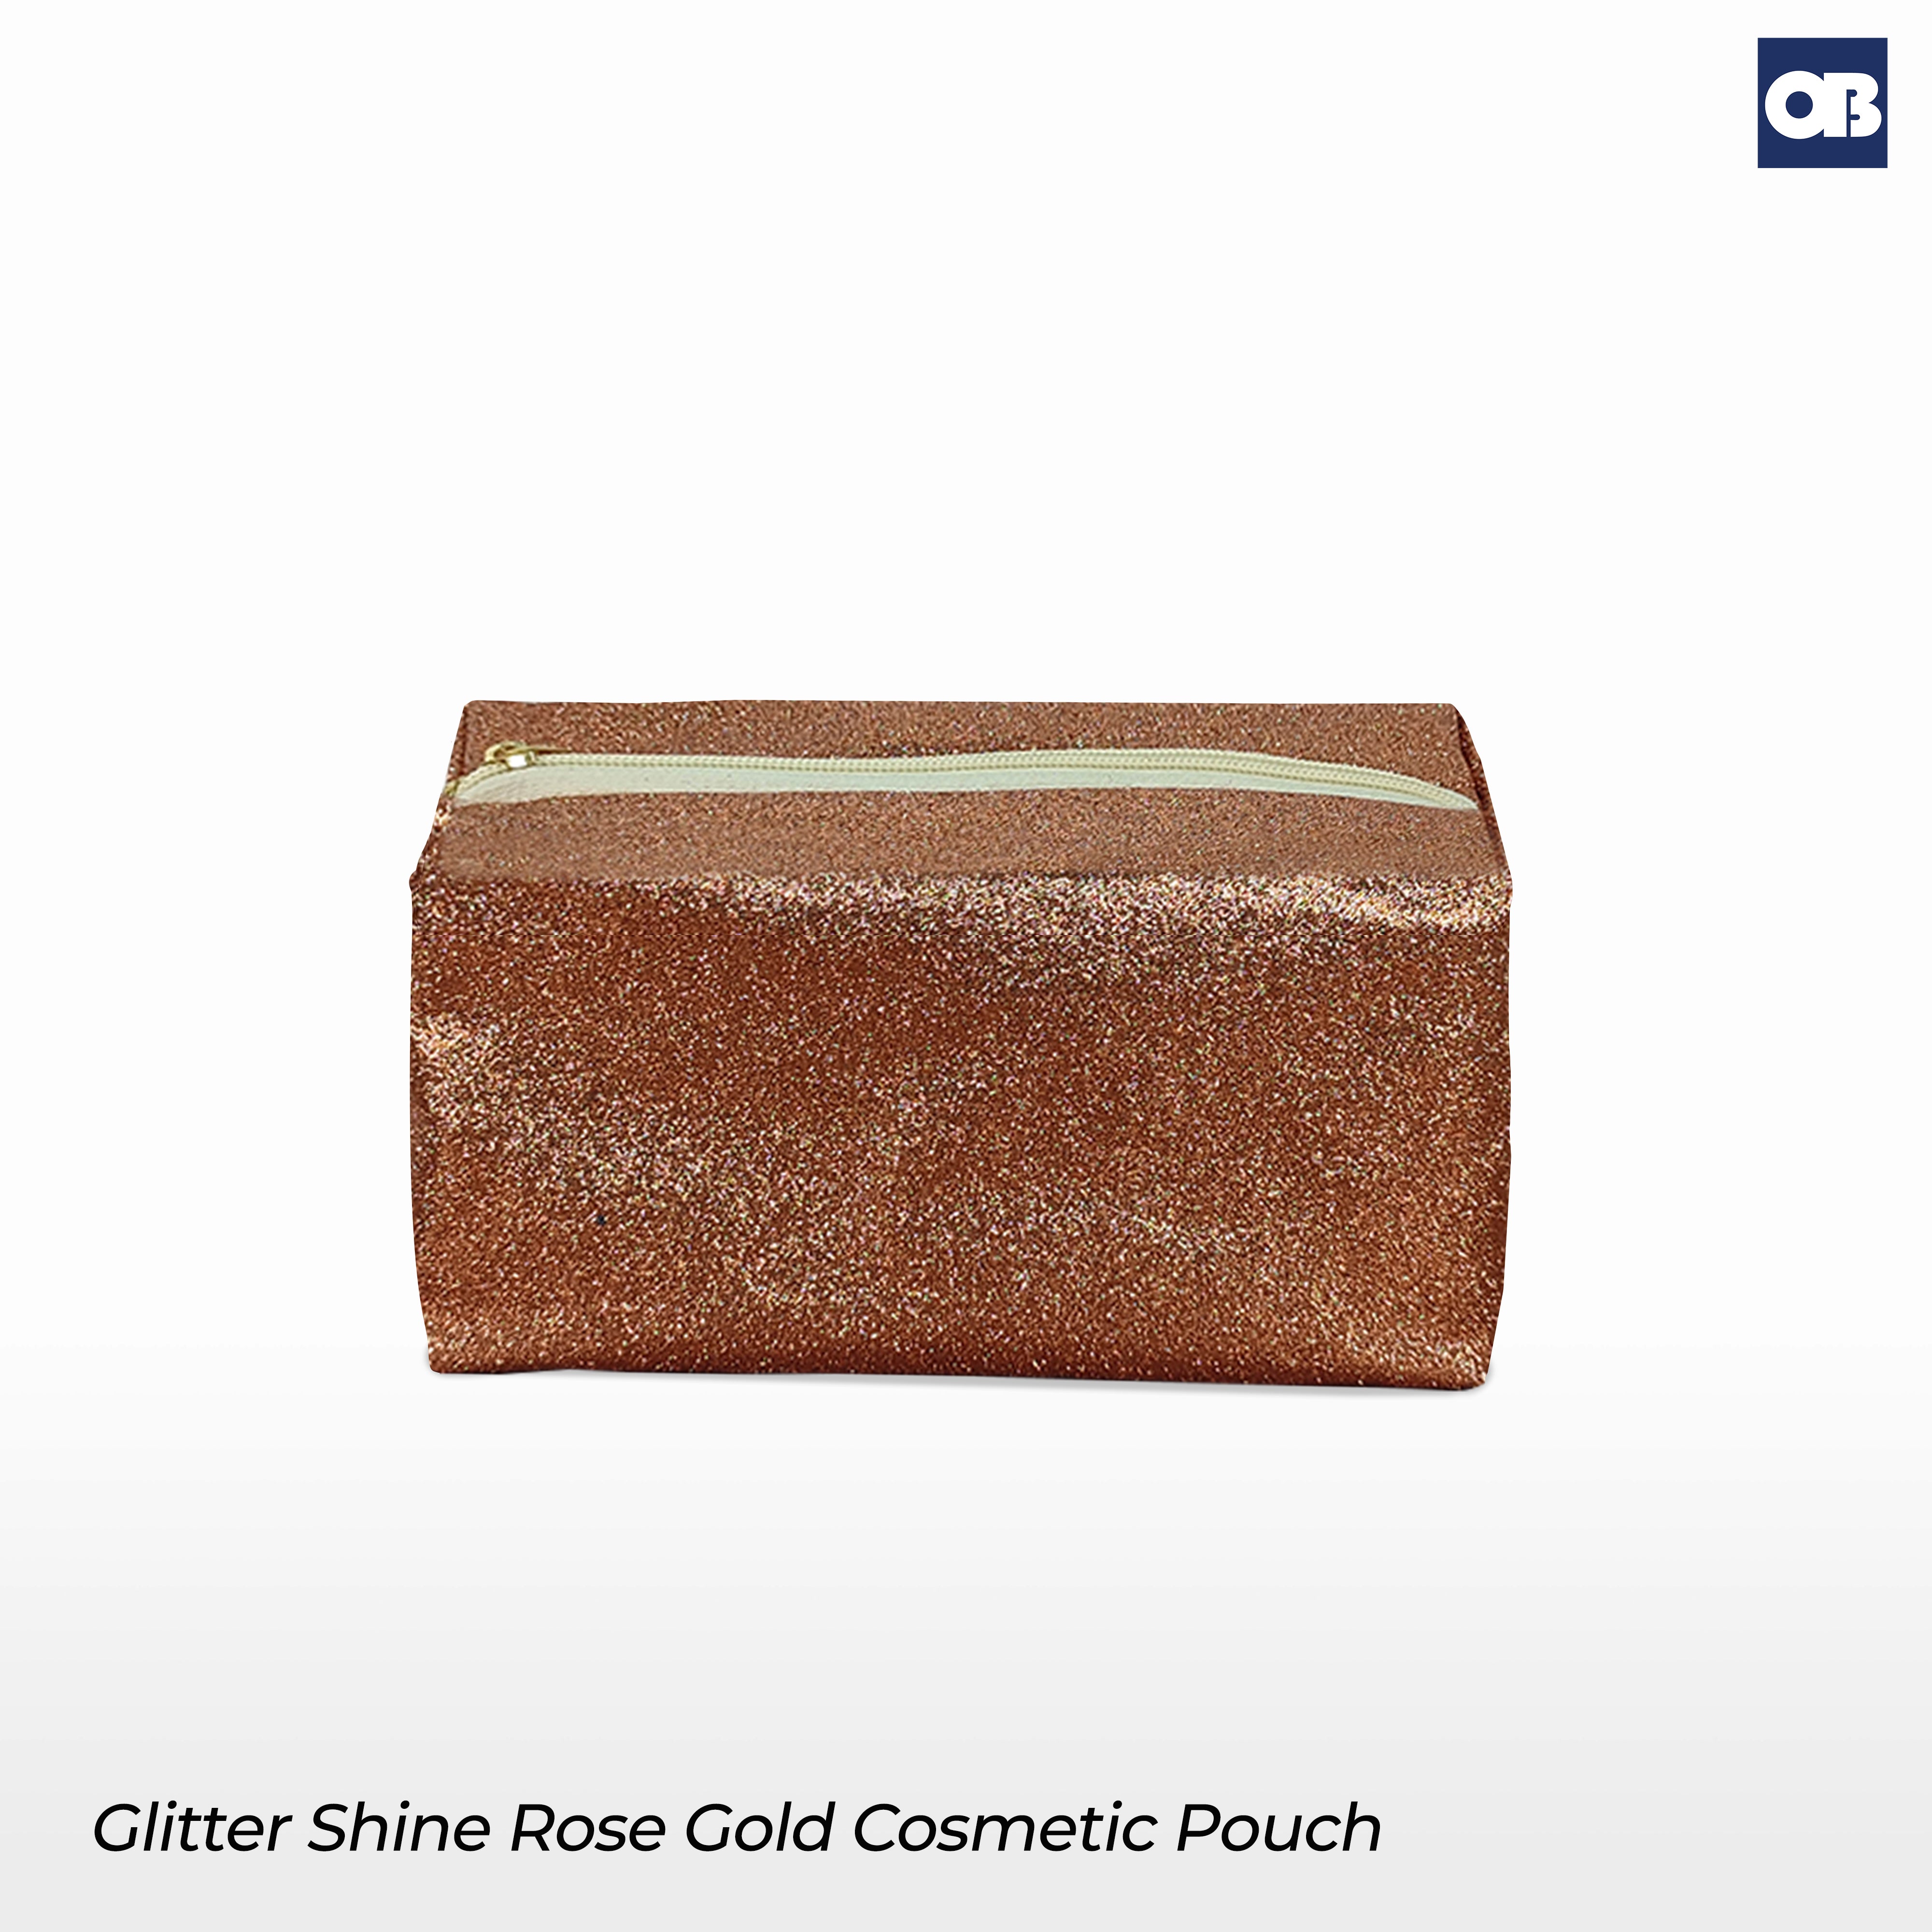 OB Glitter Shine Rose Gold Cosmetic Pouch